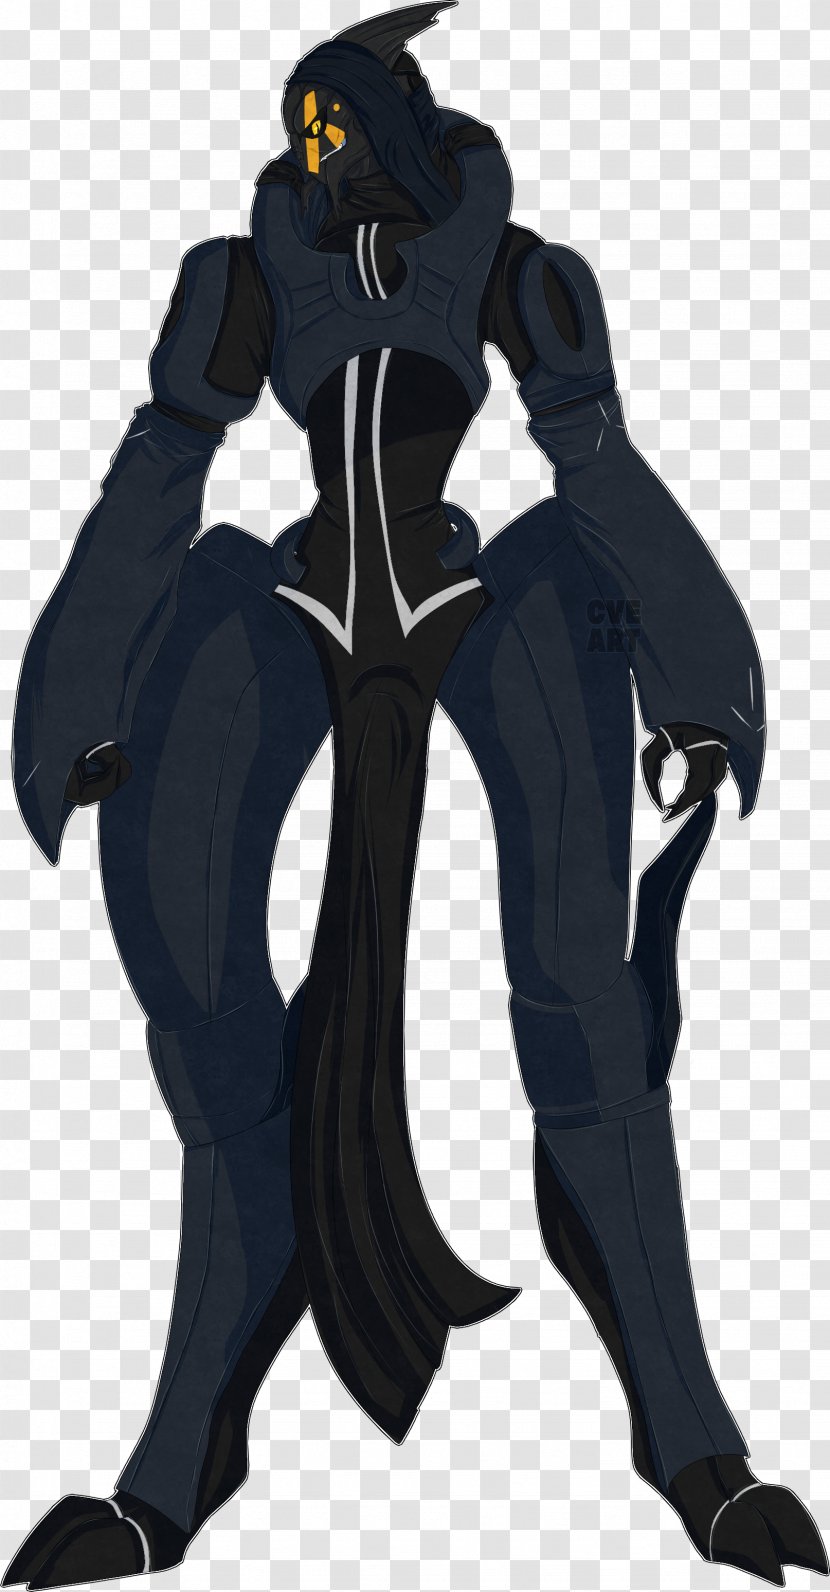 Costume Design Character Fiction - Boody Transparent PNG